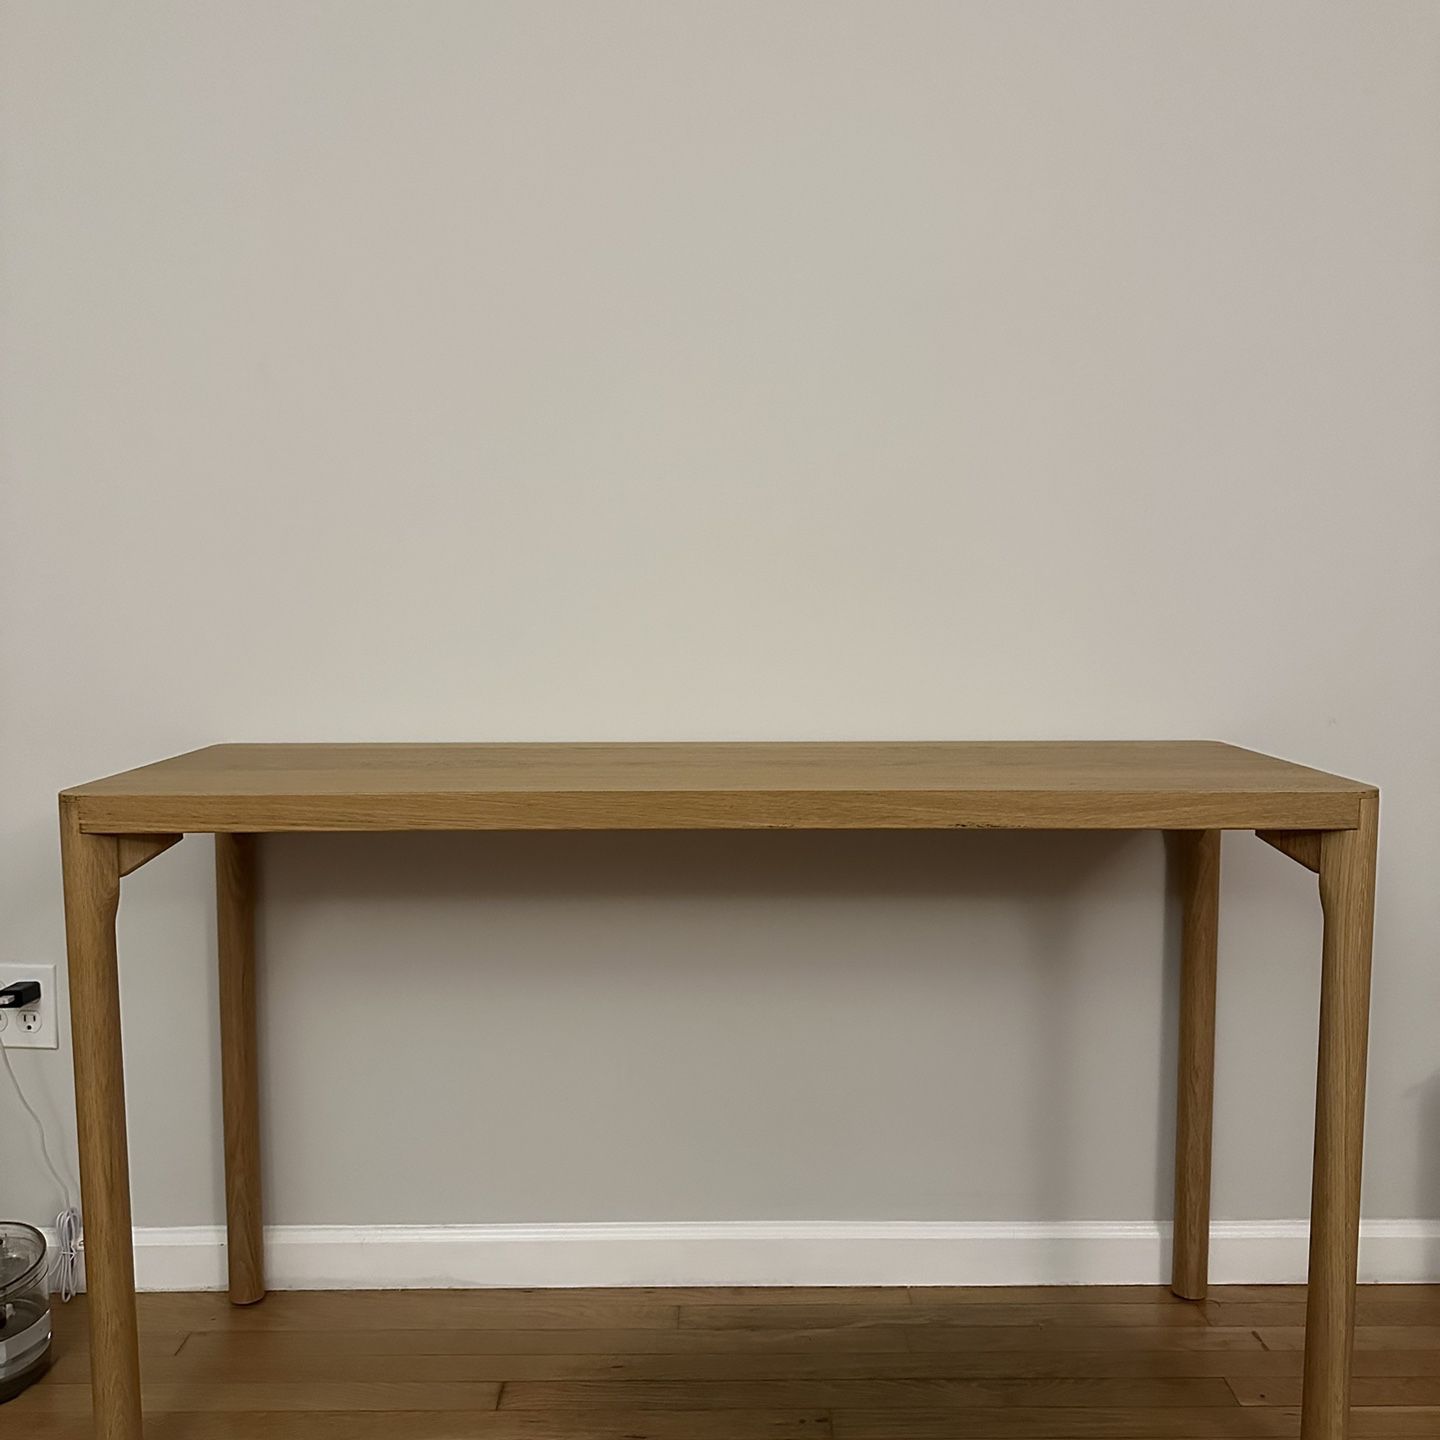 Small Table / Entryway Table / Desk 